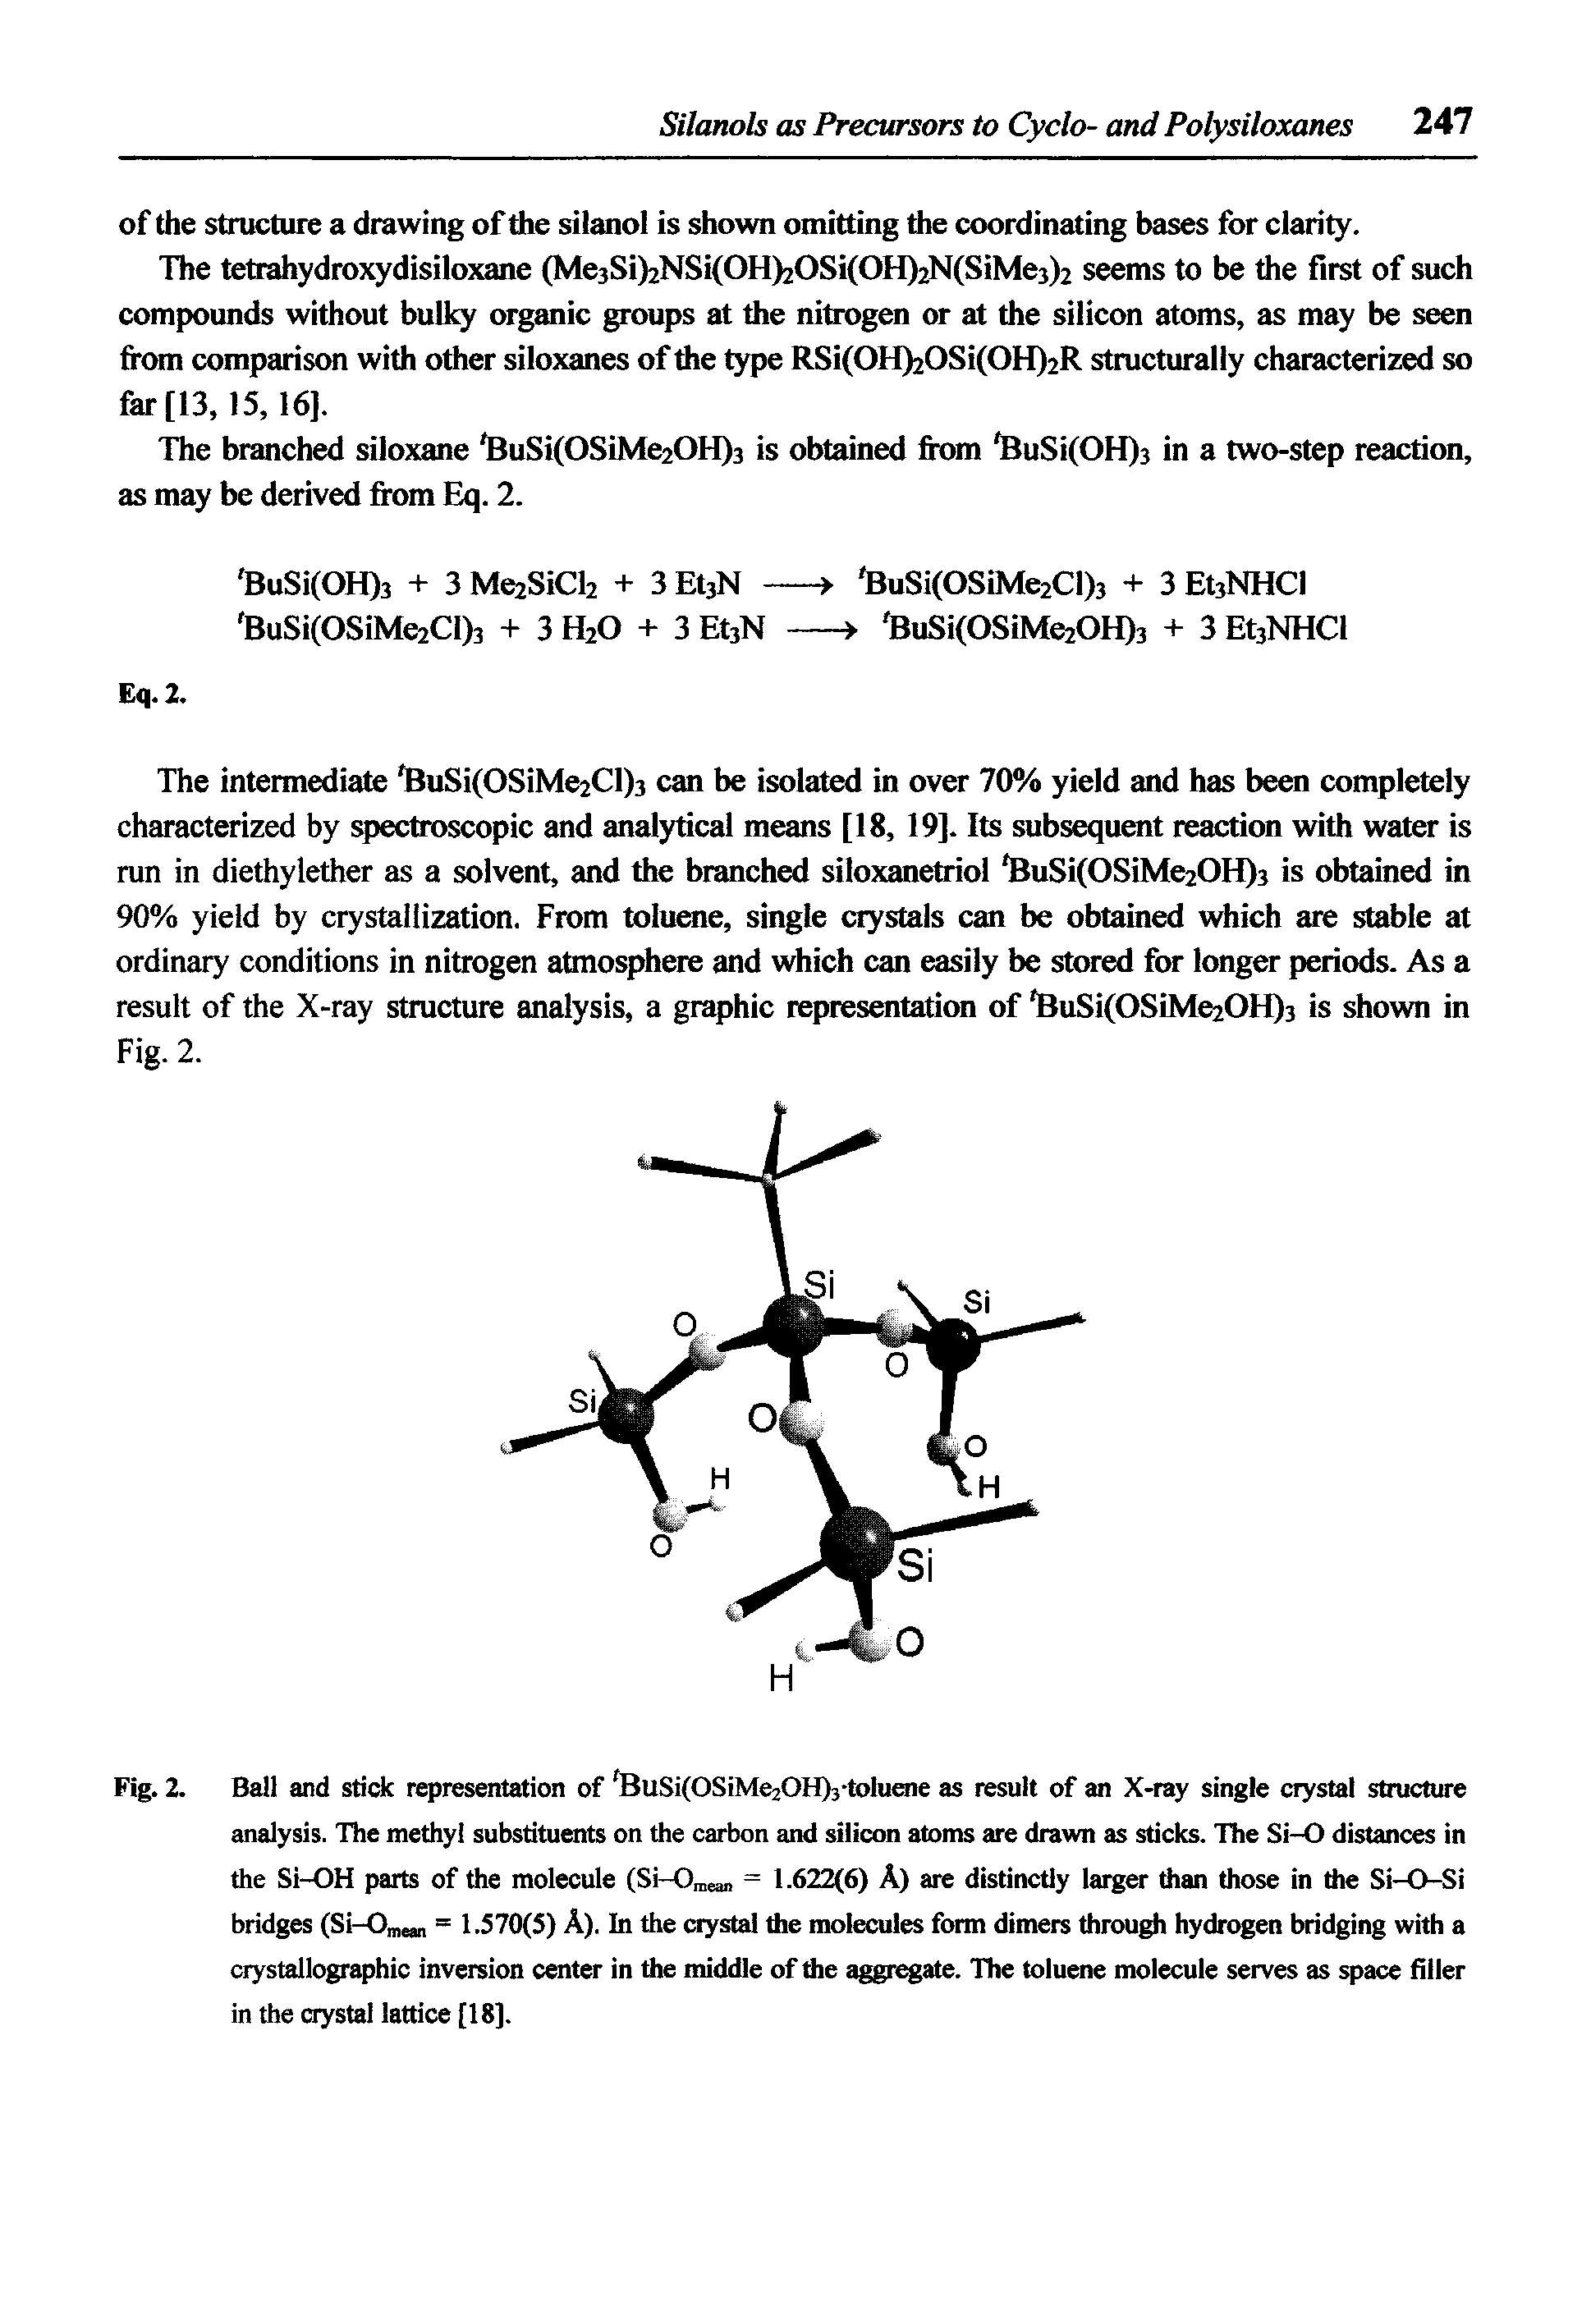 Fig. 2. Ball and stick representation of BuSi(OSiMe20H)3-toluaie as result of an X-ray single crystal structure analysis. The methyl substituents on the carbon and silicon atoms are drawn as sticks. The Si-O distances in the Si-OH parts of the molecule (Si-0 ea = 1.622(6) A) are distinctly larger than those in the Si-O-Si bridges (Si-Omean = 1.570(5) A). In the crystal the molecules form dimers through hydrogen bridging with a crystallographic inversion center in the middle of the aggr ate. The toluene molecule serves as space filler in the crystal lattice [18],...